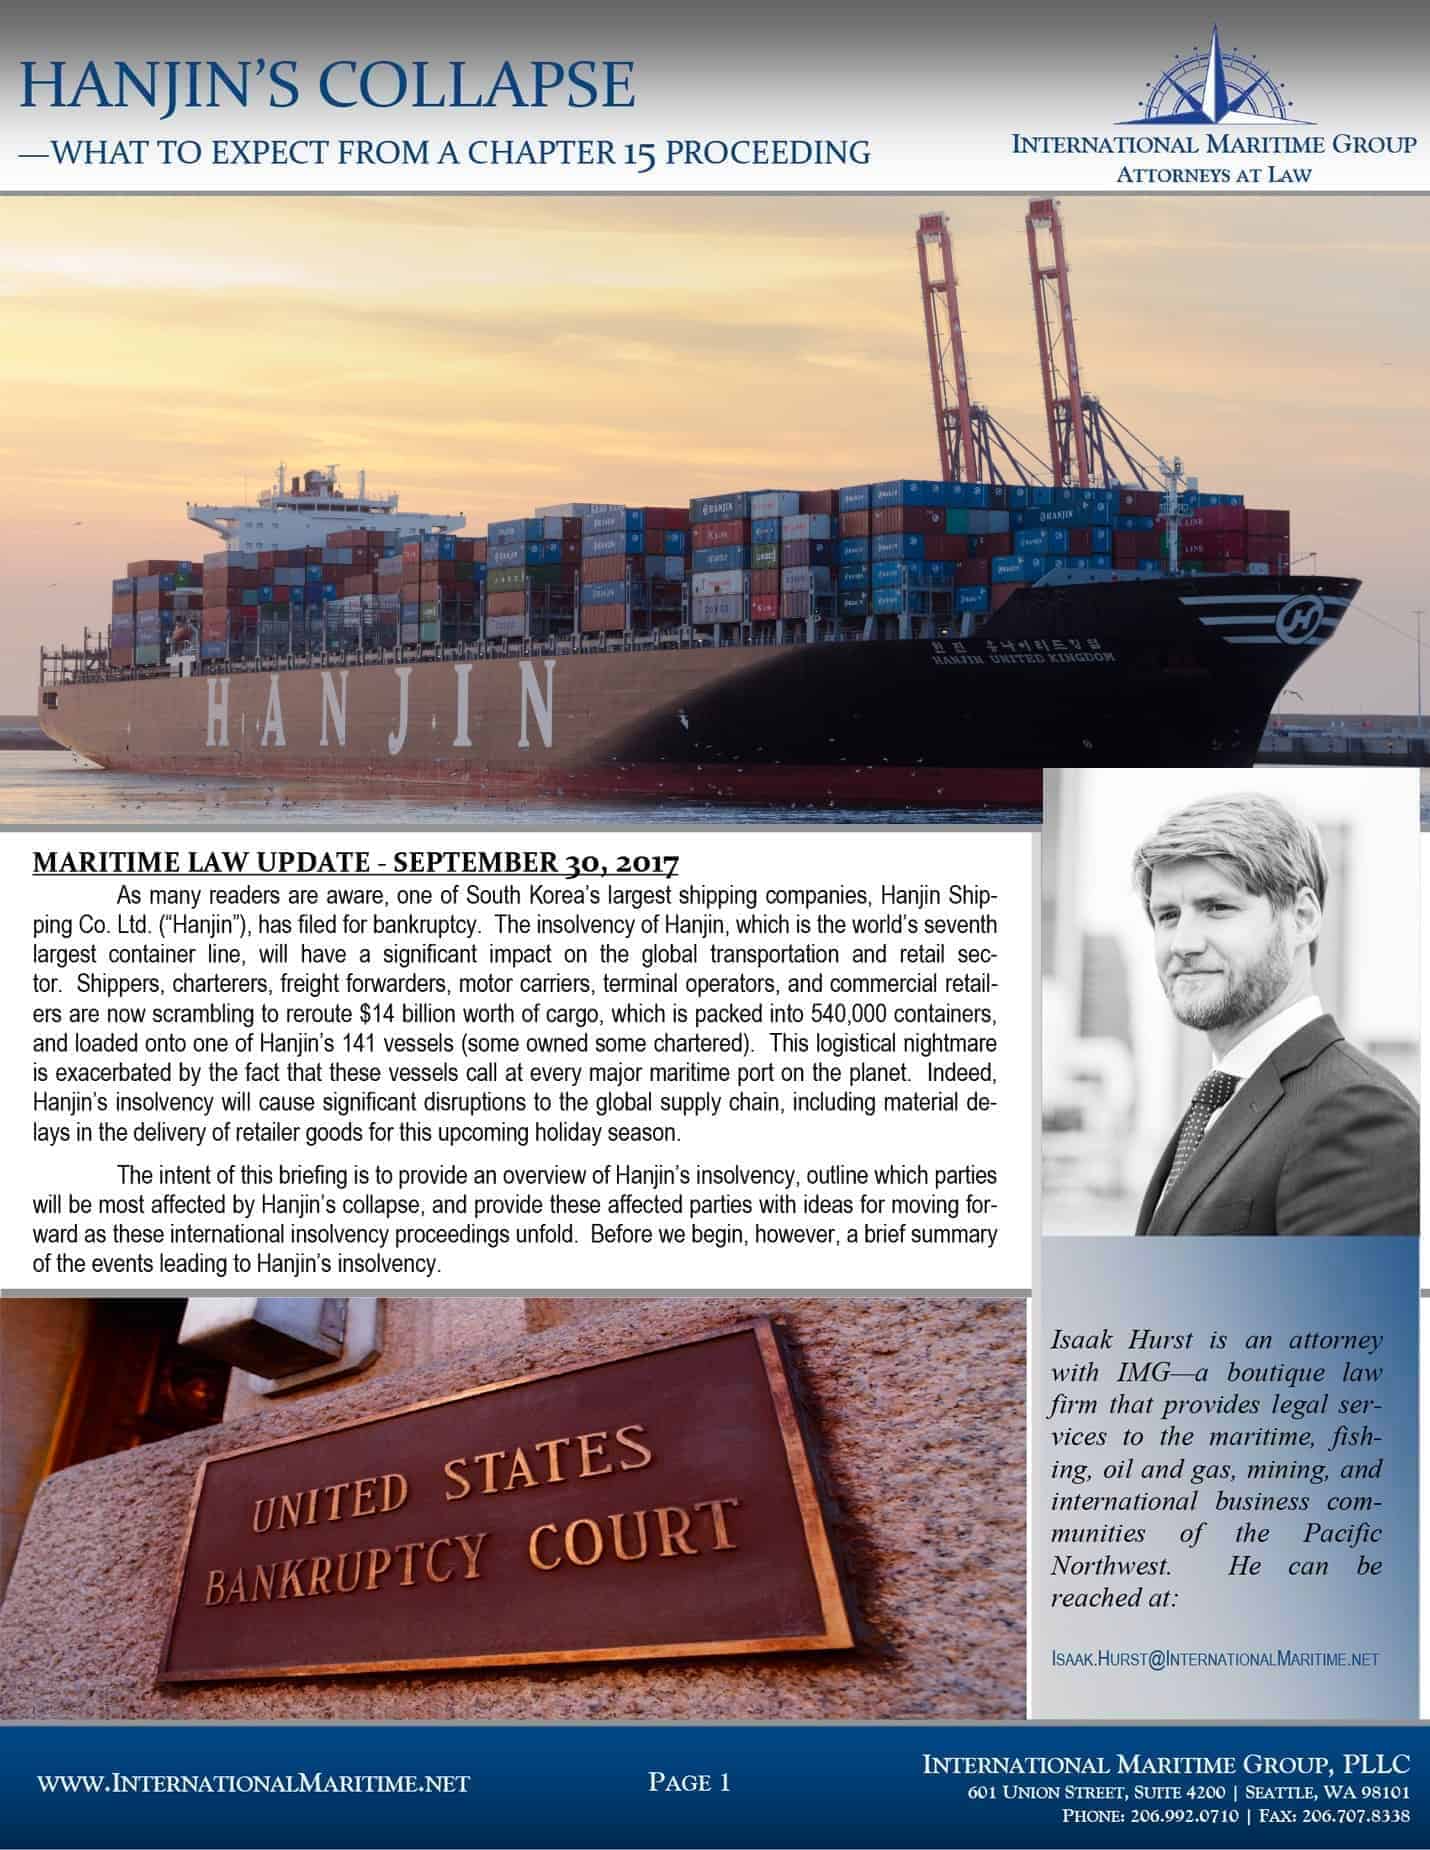 Hanjin's Collapse - What to Expect from a Chapter 15 Proceeding - International Maritime Group